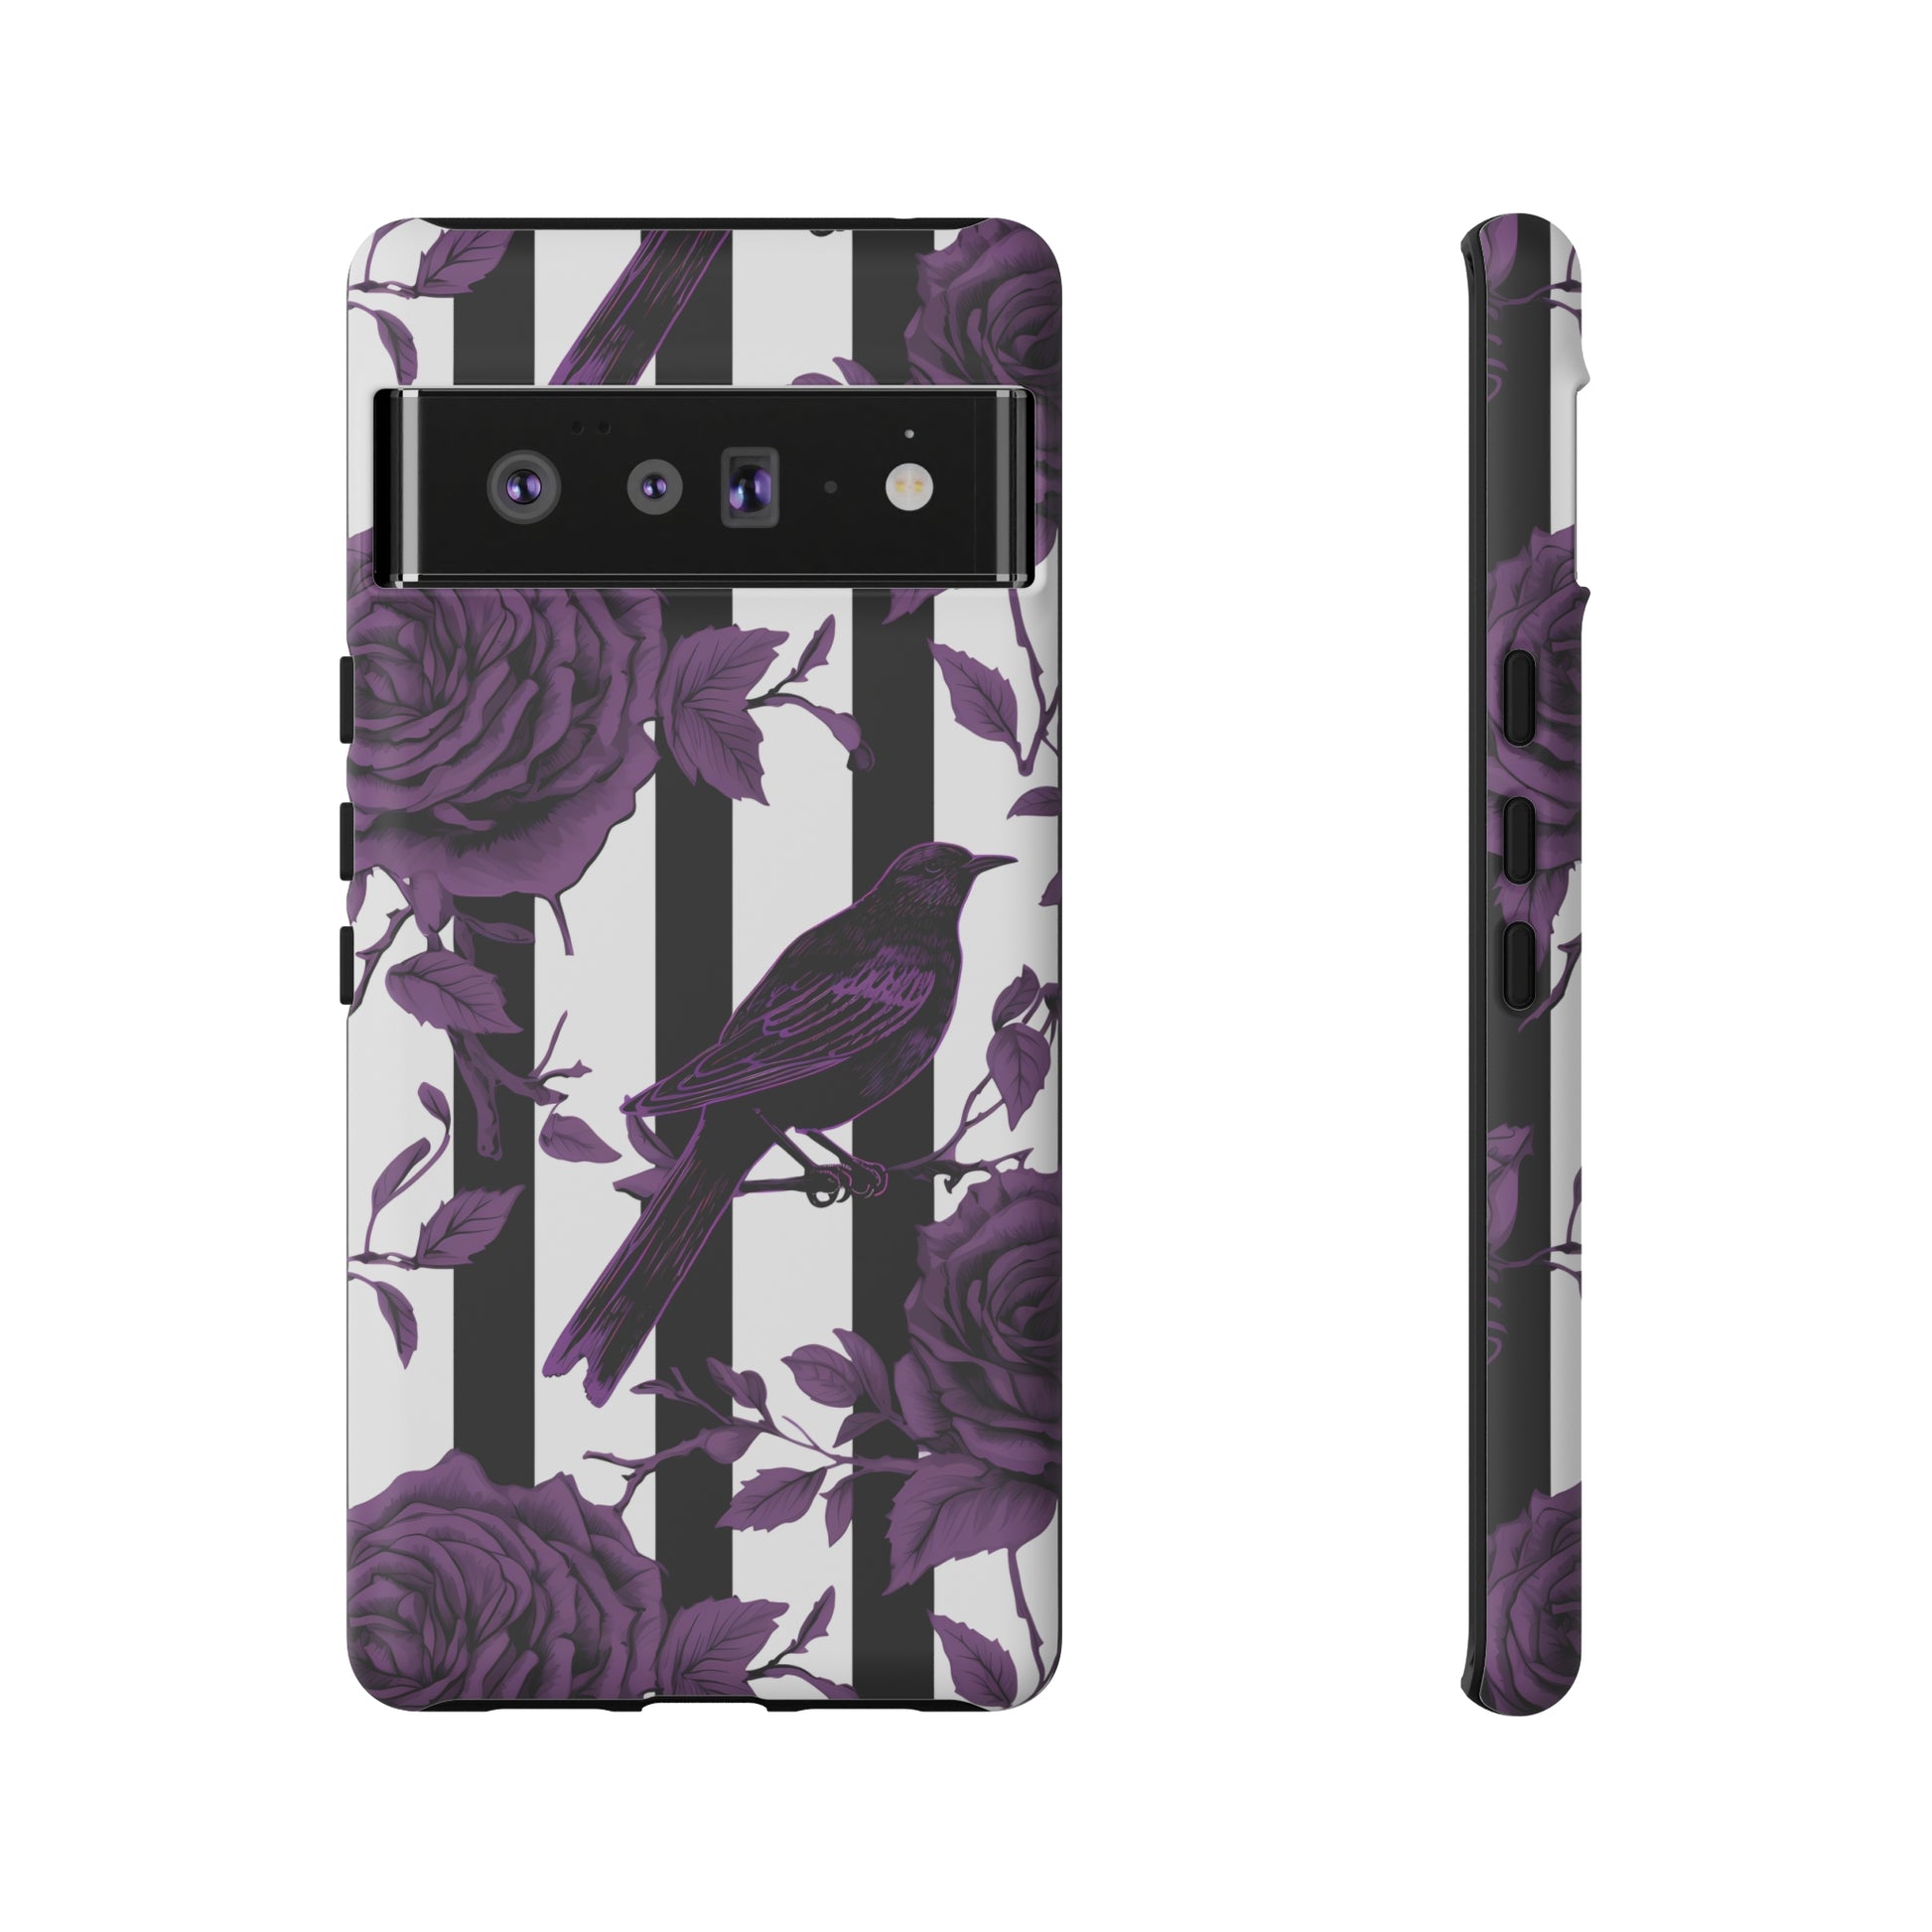 Striped Crows and Roses Tough Cases for iPhone Samsung Google PhonesPhone CaseVTZdesignsGoogle Pixel 6 ProMatteAccessoriescrowsGlossy